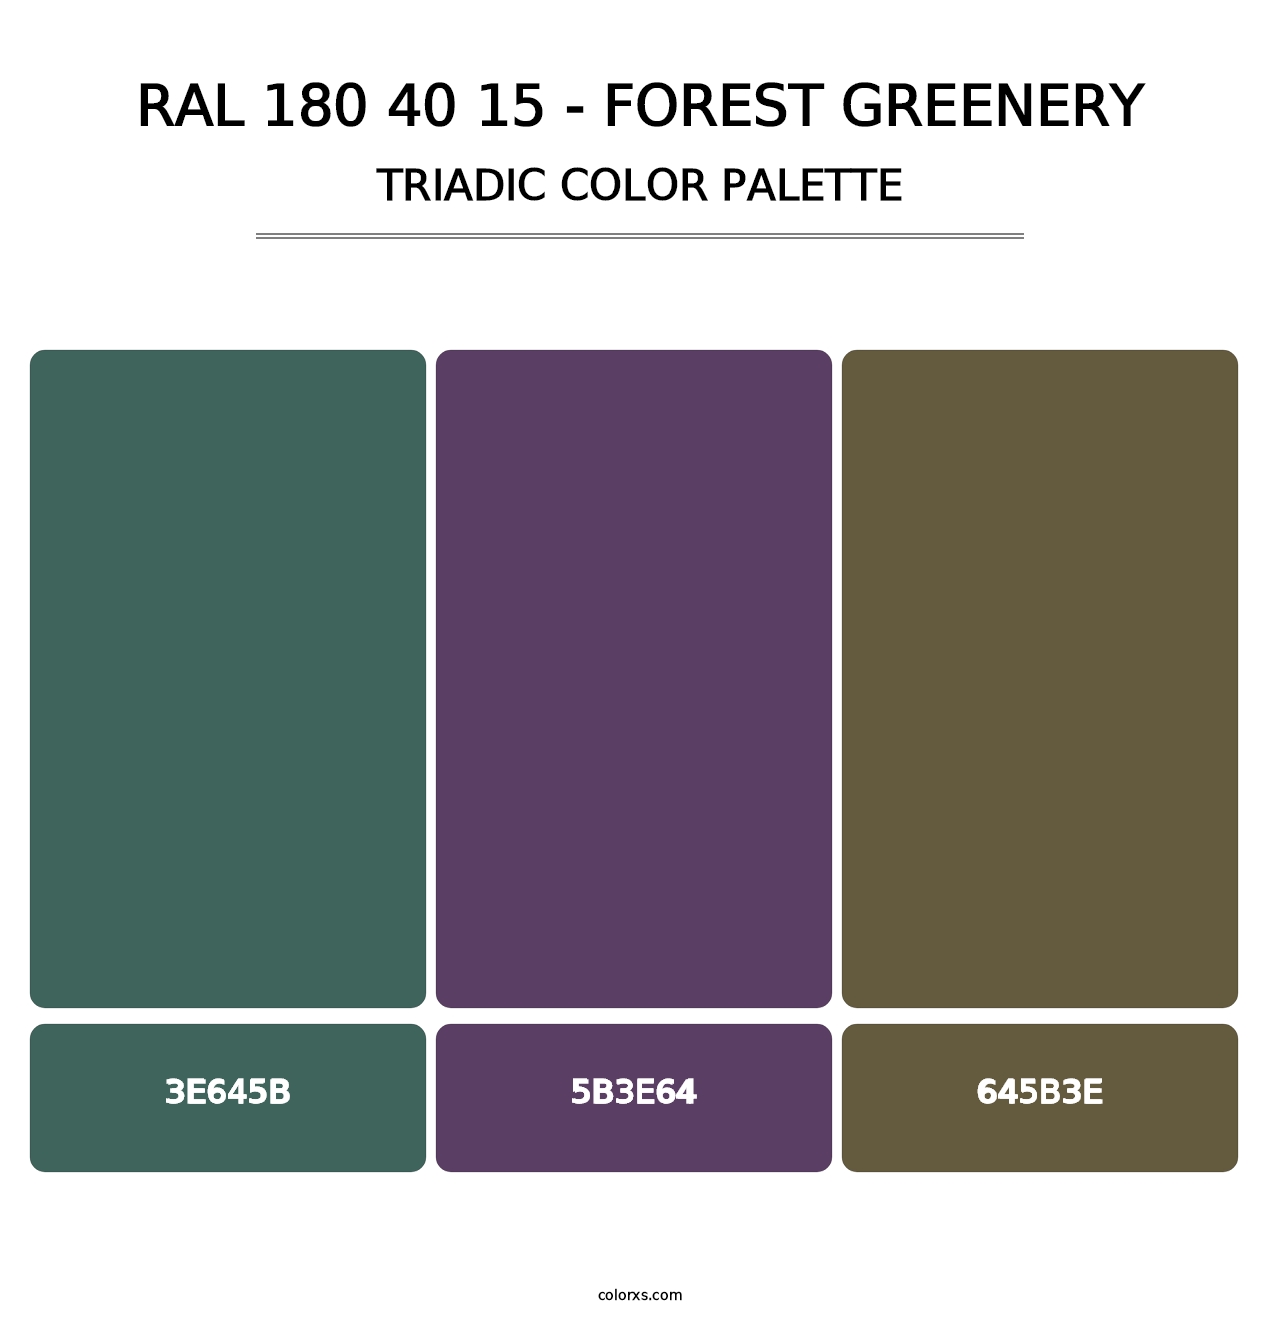 RAL 180 40 15 - Forest Greenery - Triadic Color Palette